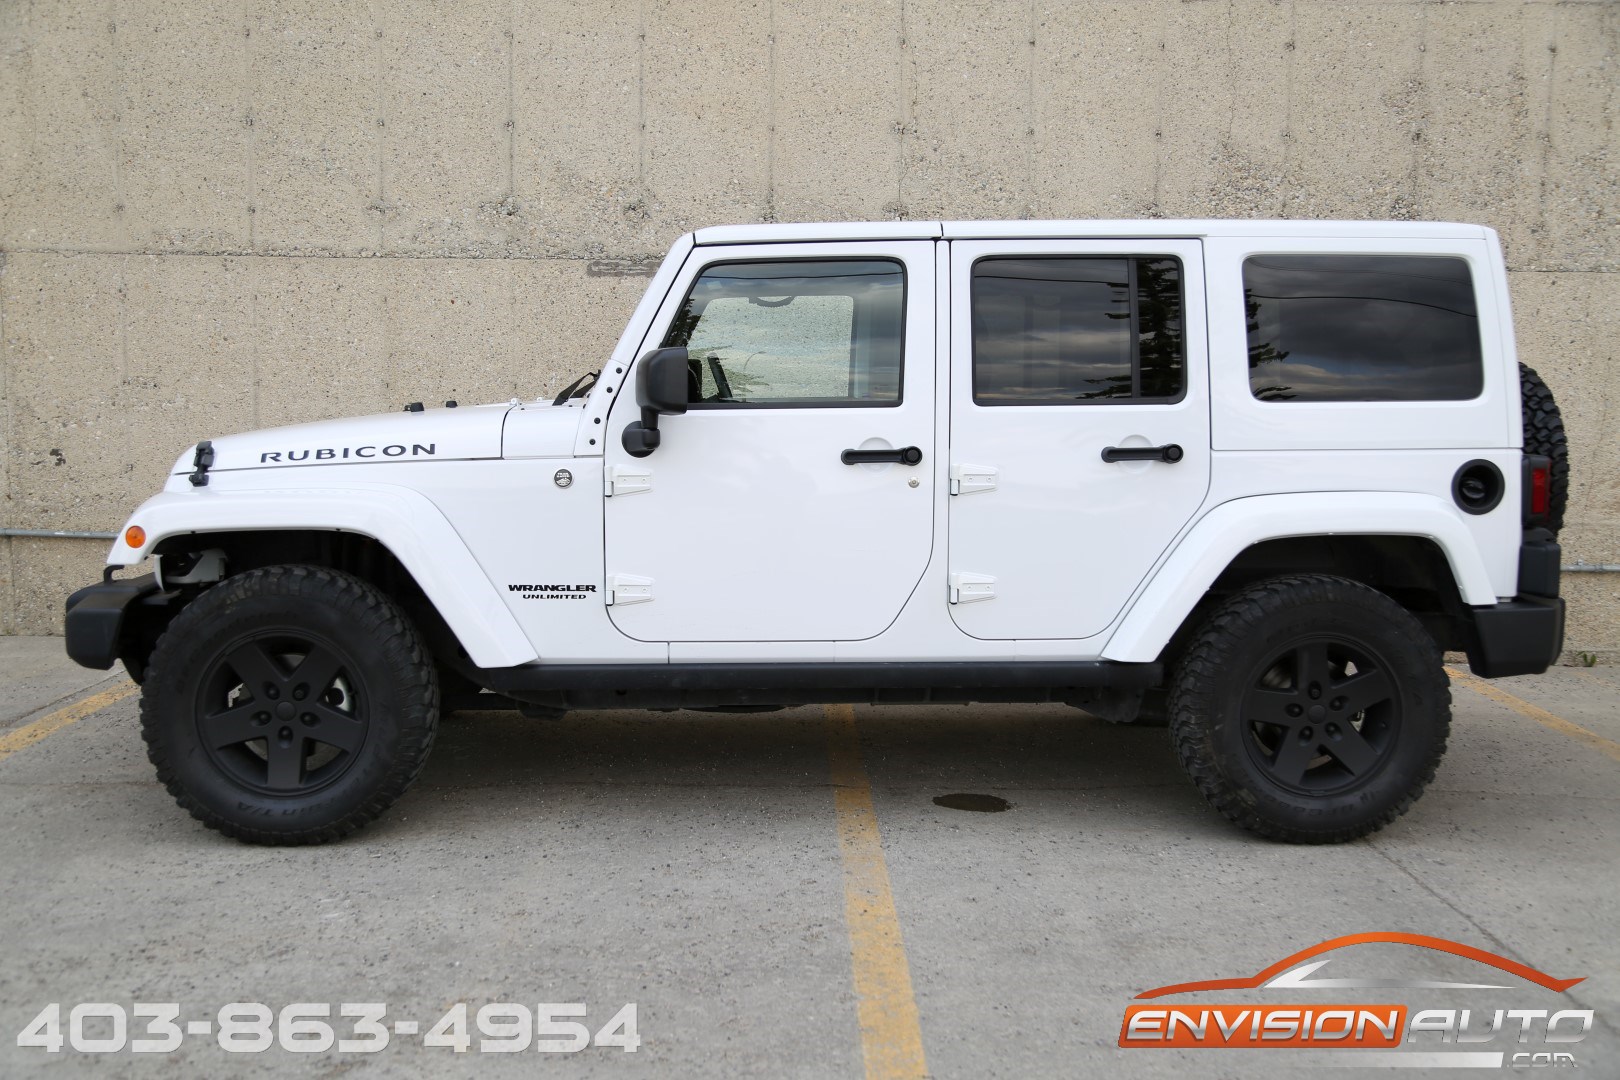 2012 Jeep Wrangler Unlimited Rubicon 4 x 4 – 6 Speed Manual - Envision Auto